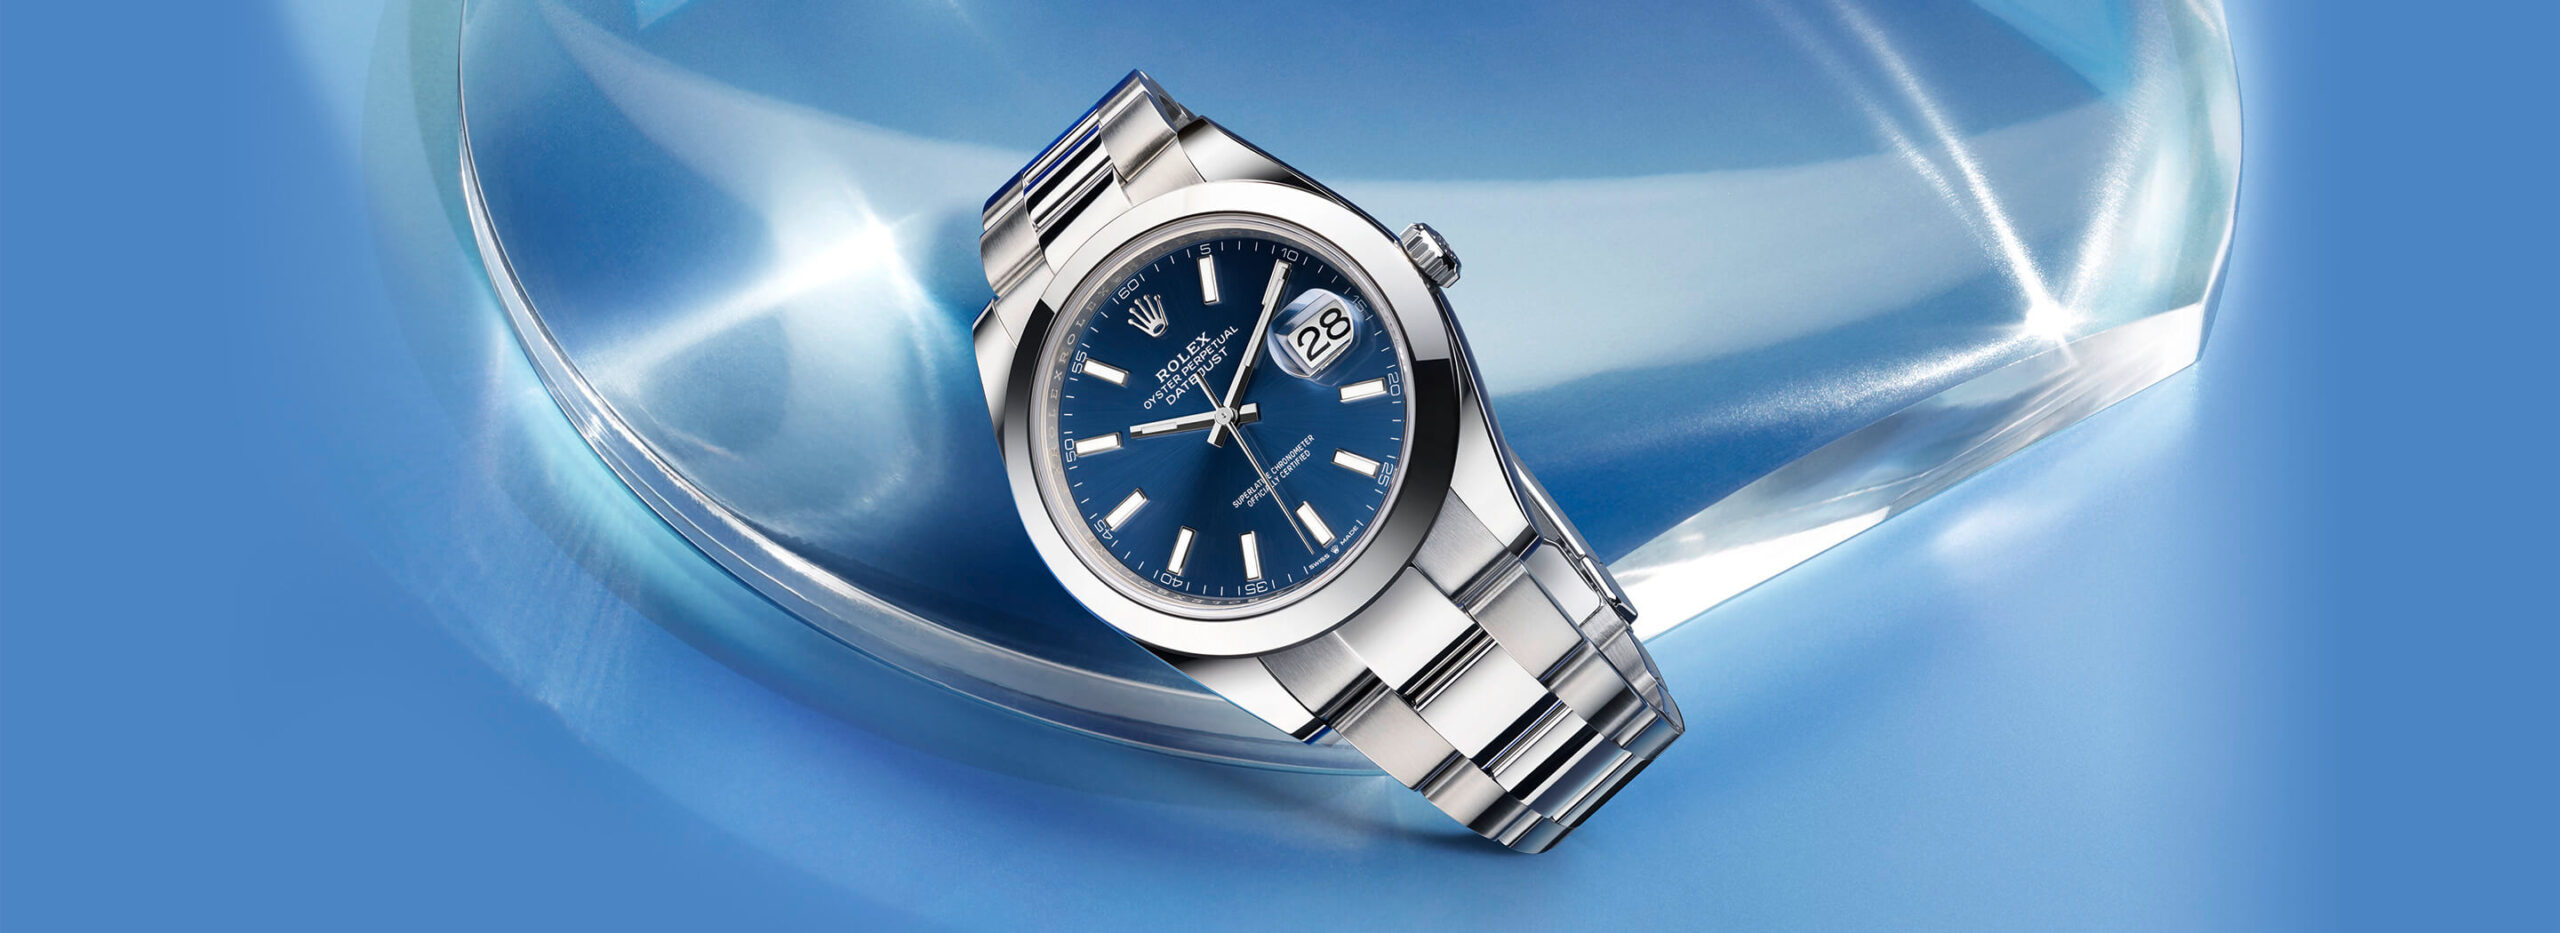 rolex datejust watches - global watch company